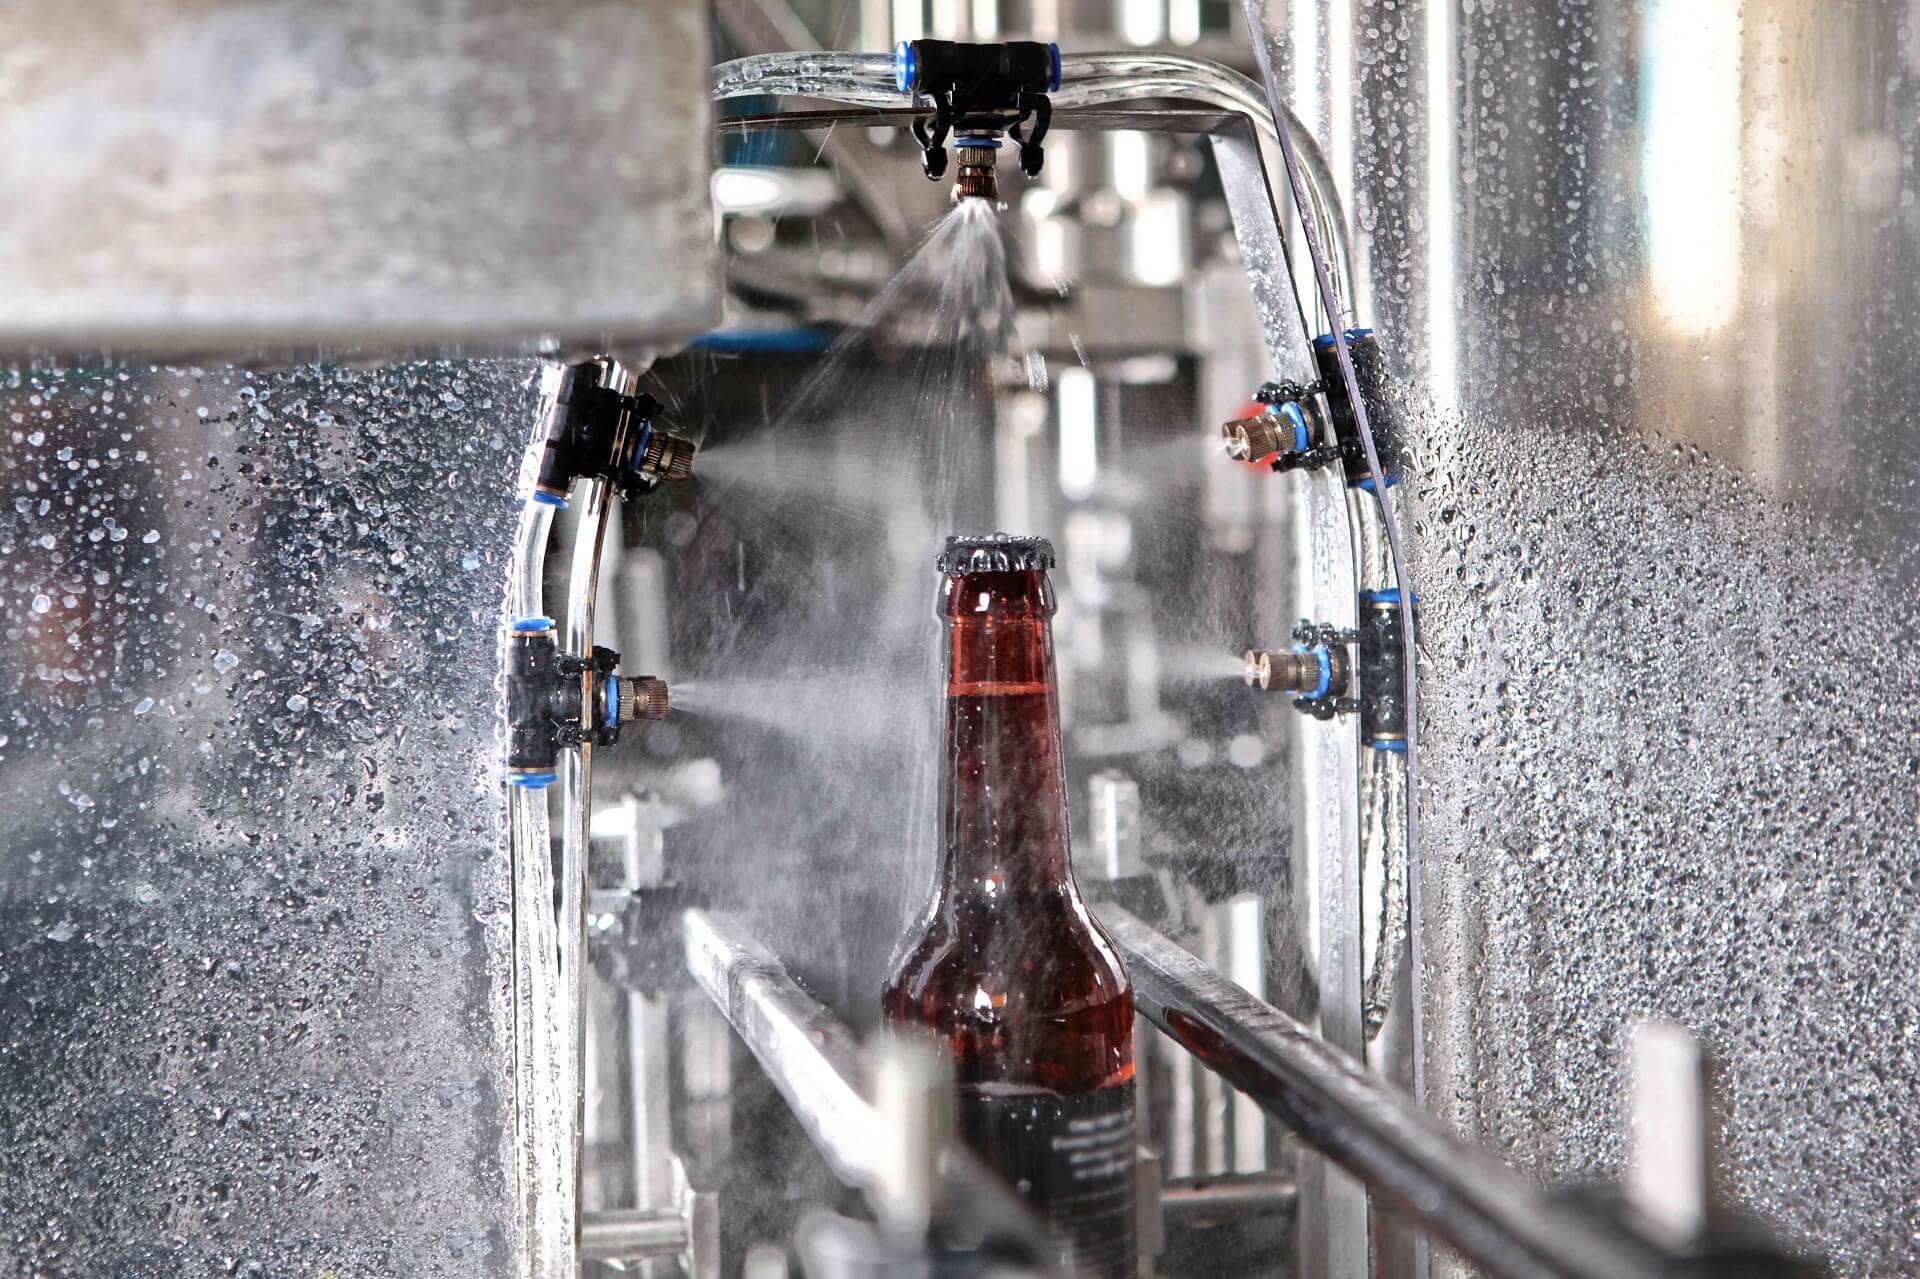 Detail of A bottle of beer on a conveyor belt under a stream of water. Only the bottle is in focus. The concept of production.